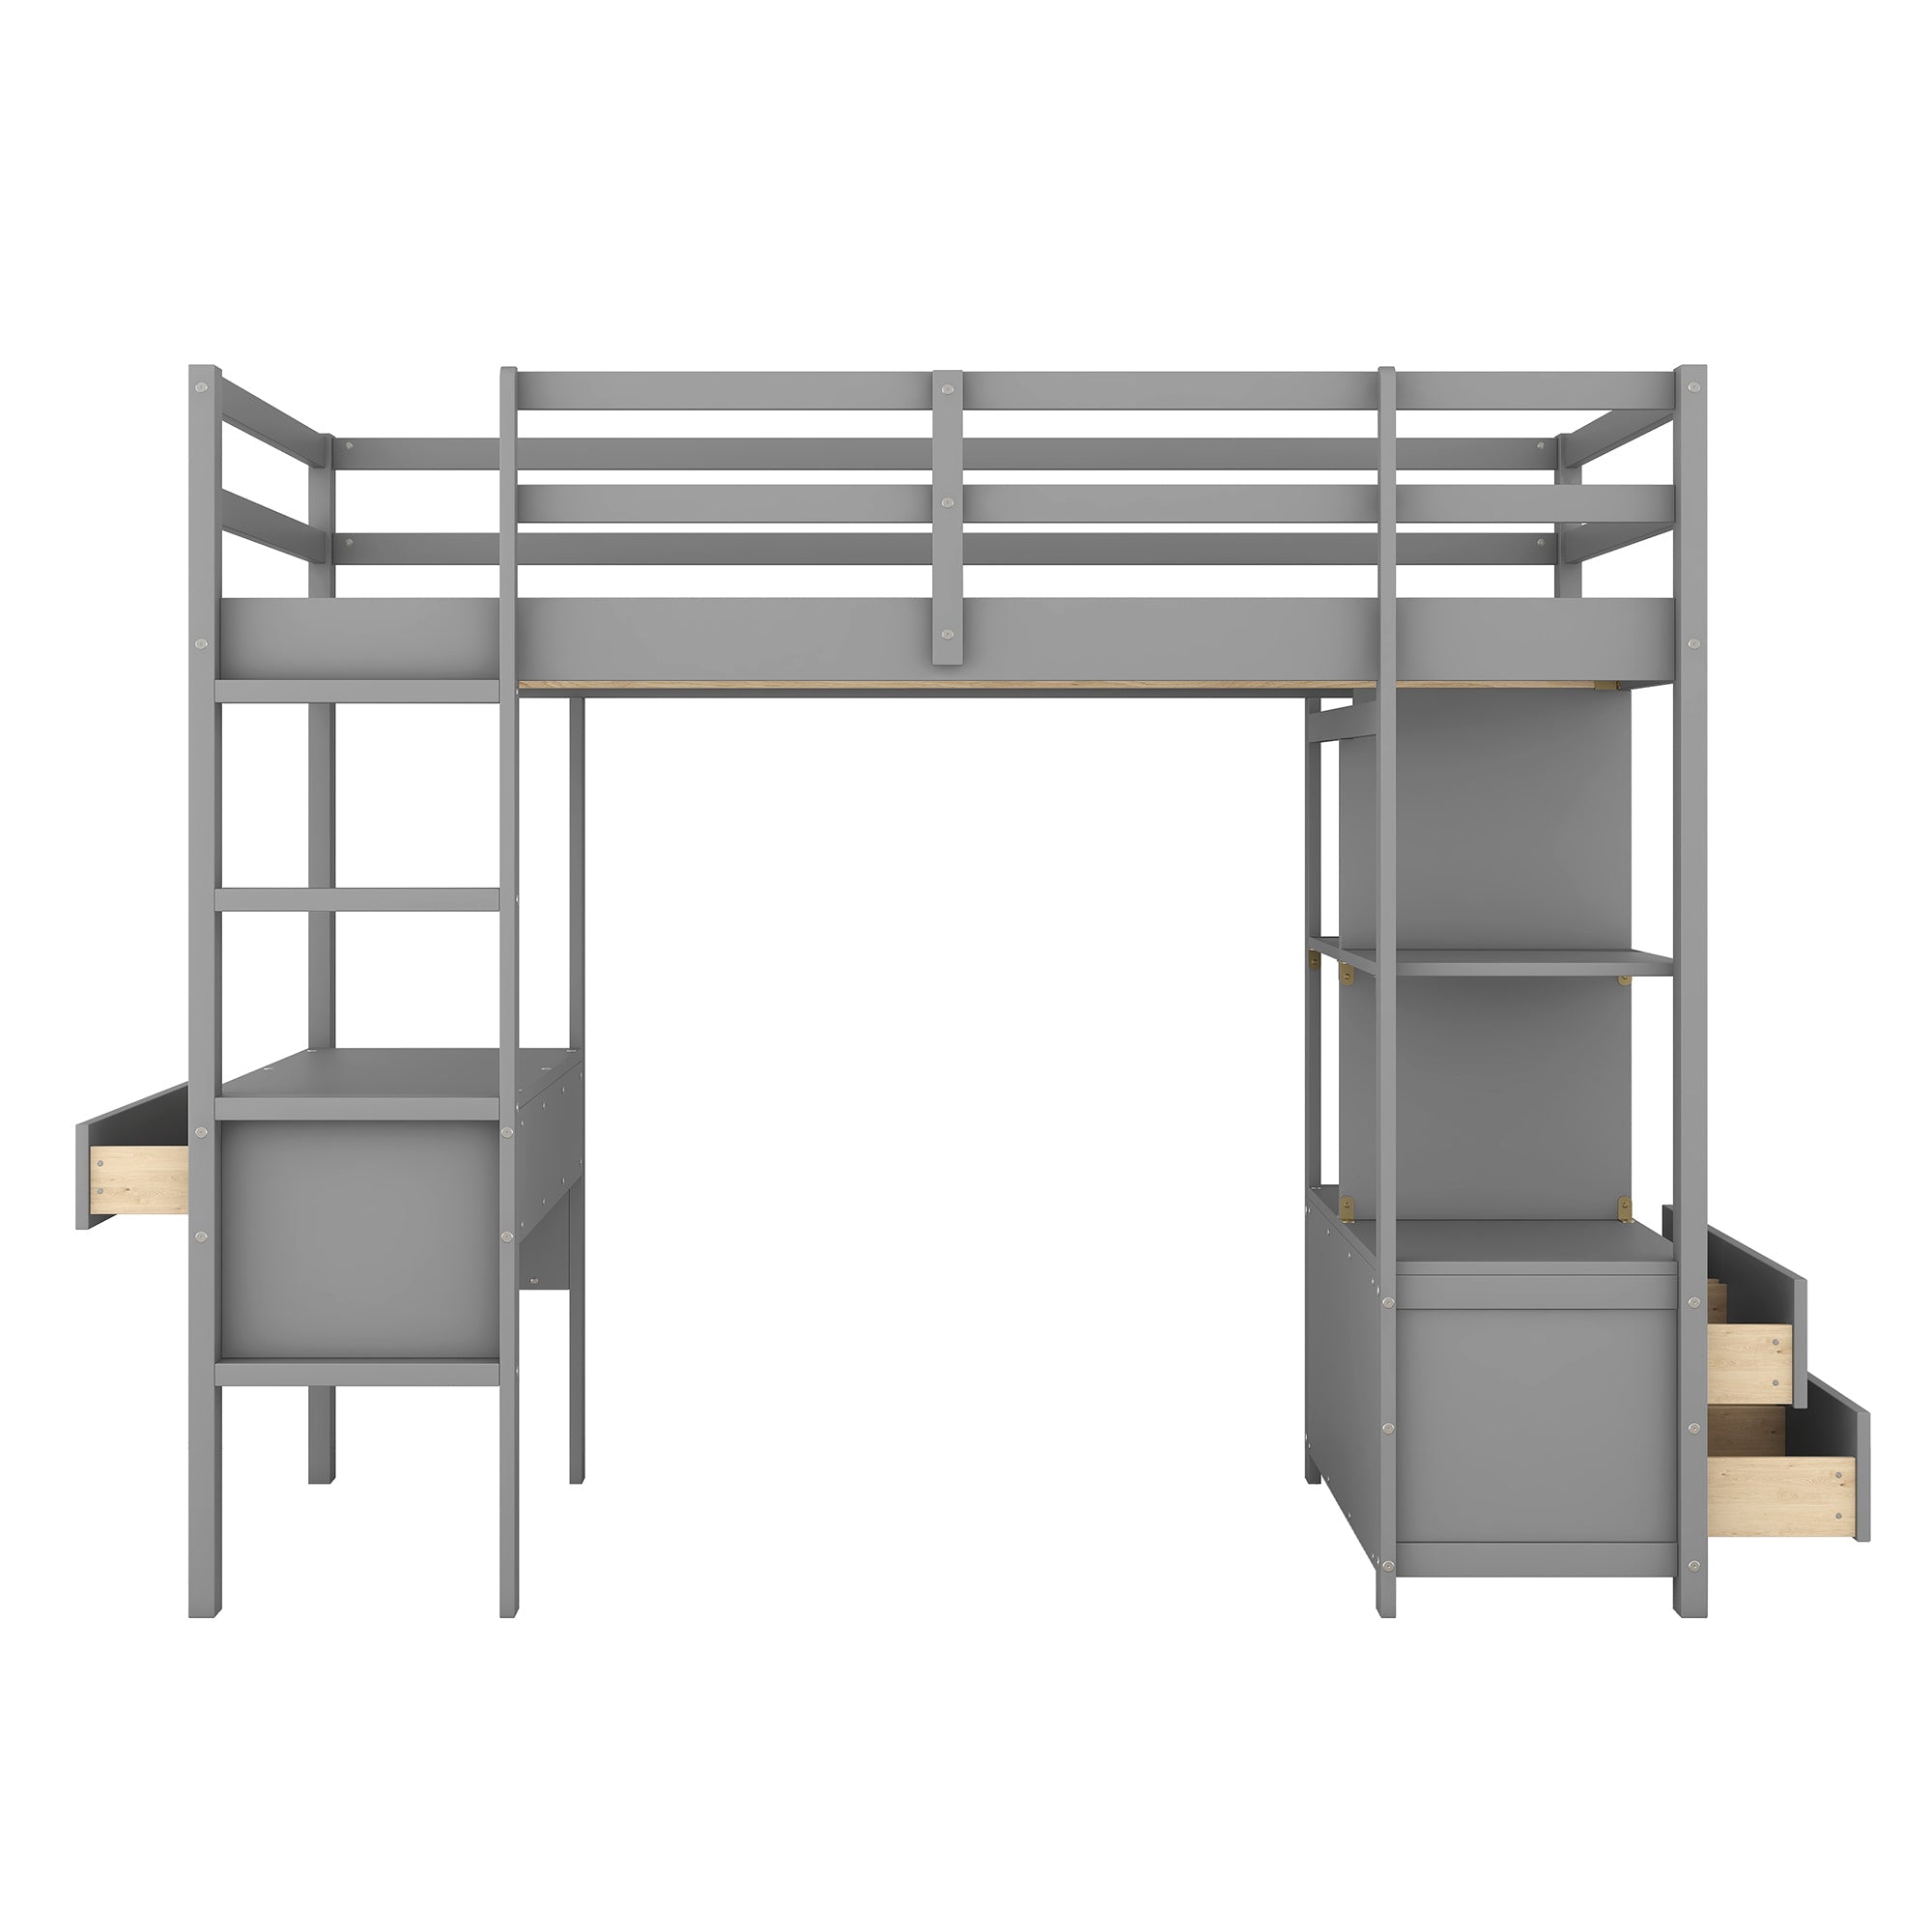 Twin Size Wood Loft Bed with Desk, Drawers and Shelf for Kids Room, Gray